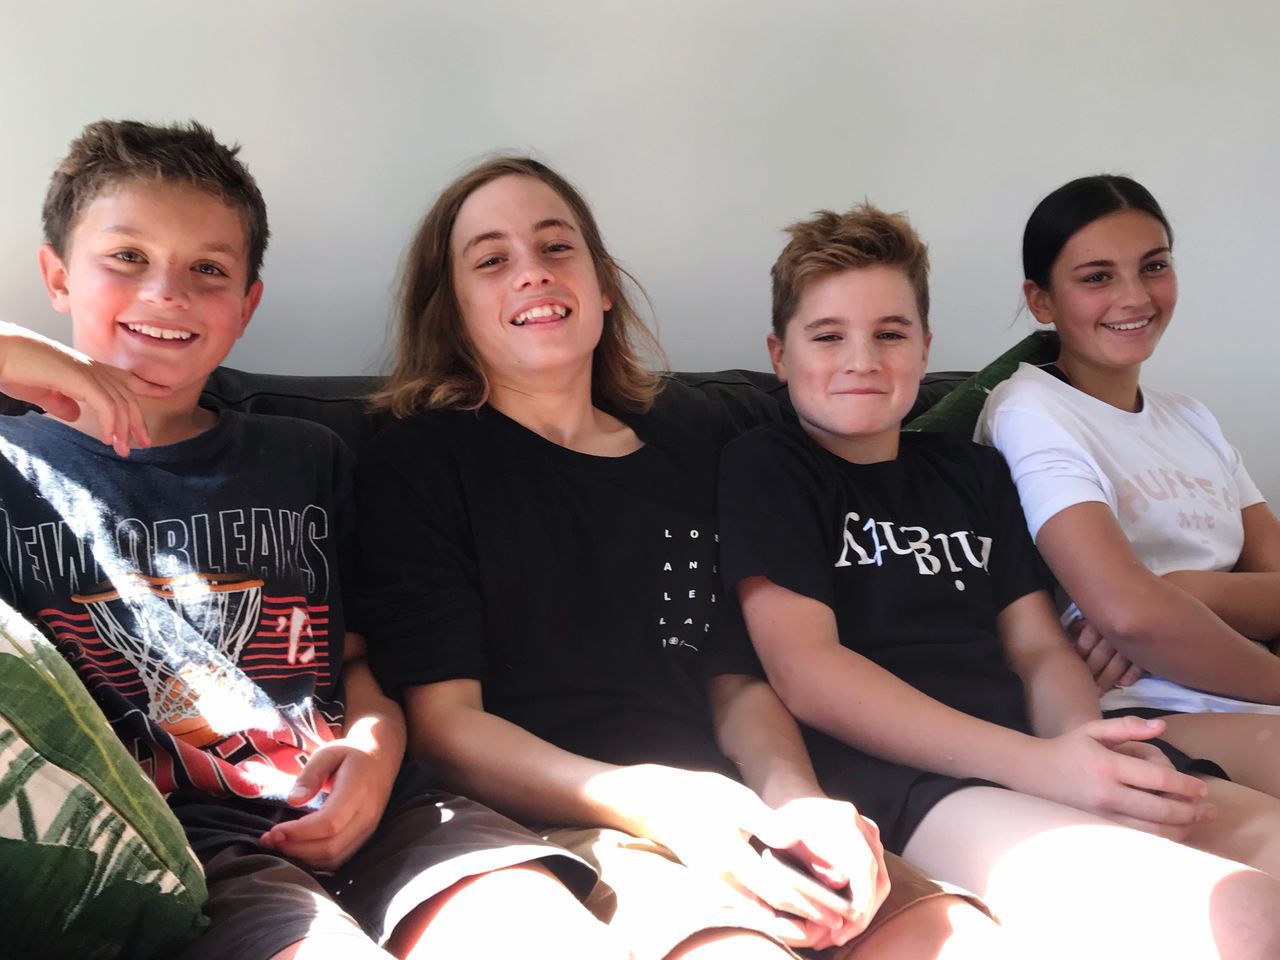 group of people, indoors, boys, sitting, smiling, front view, child, portrait, casual clothing, real people, looking at camera, girls, happiness, emotion, lifestyles, text, teenage boys, childhood, teenager, adolescence, pre-adolescent child, sister